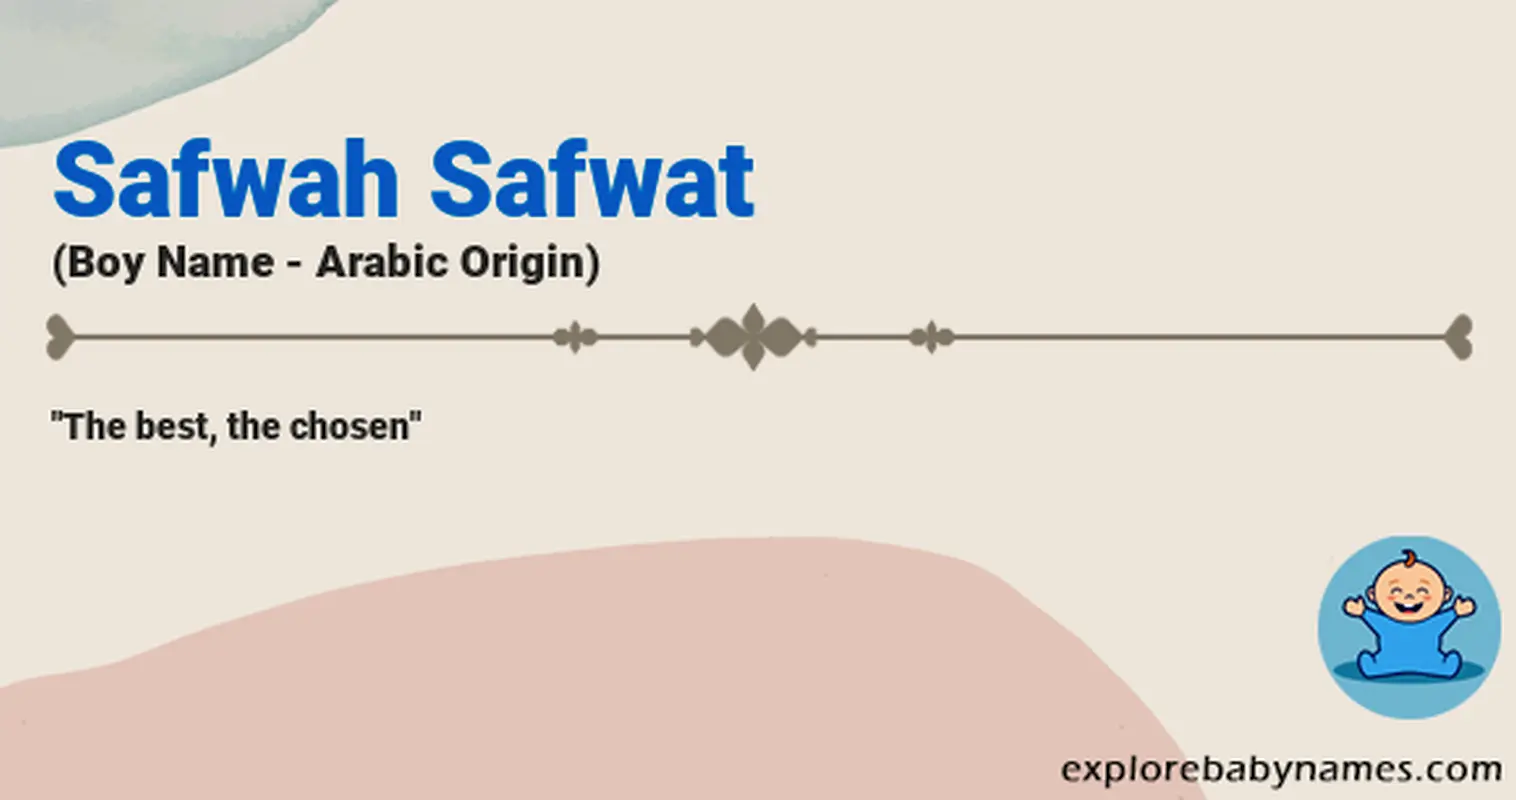 Meaning of Safwah Safwat